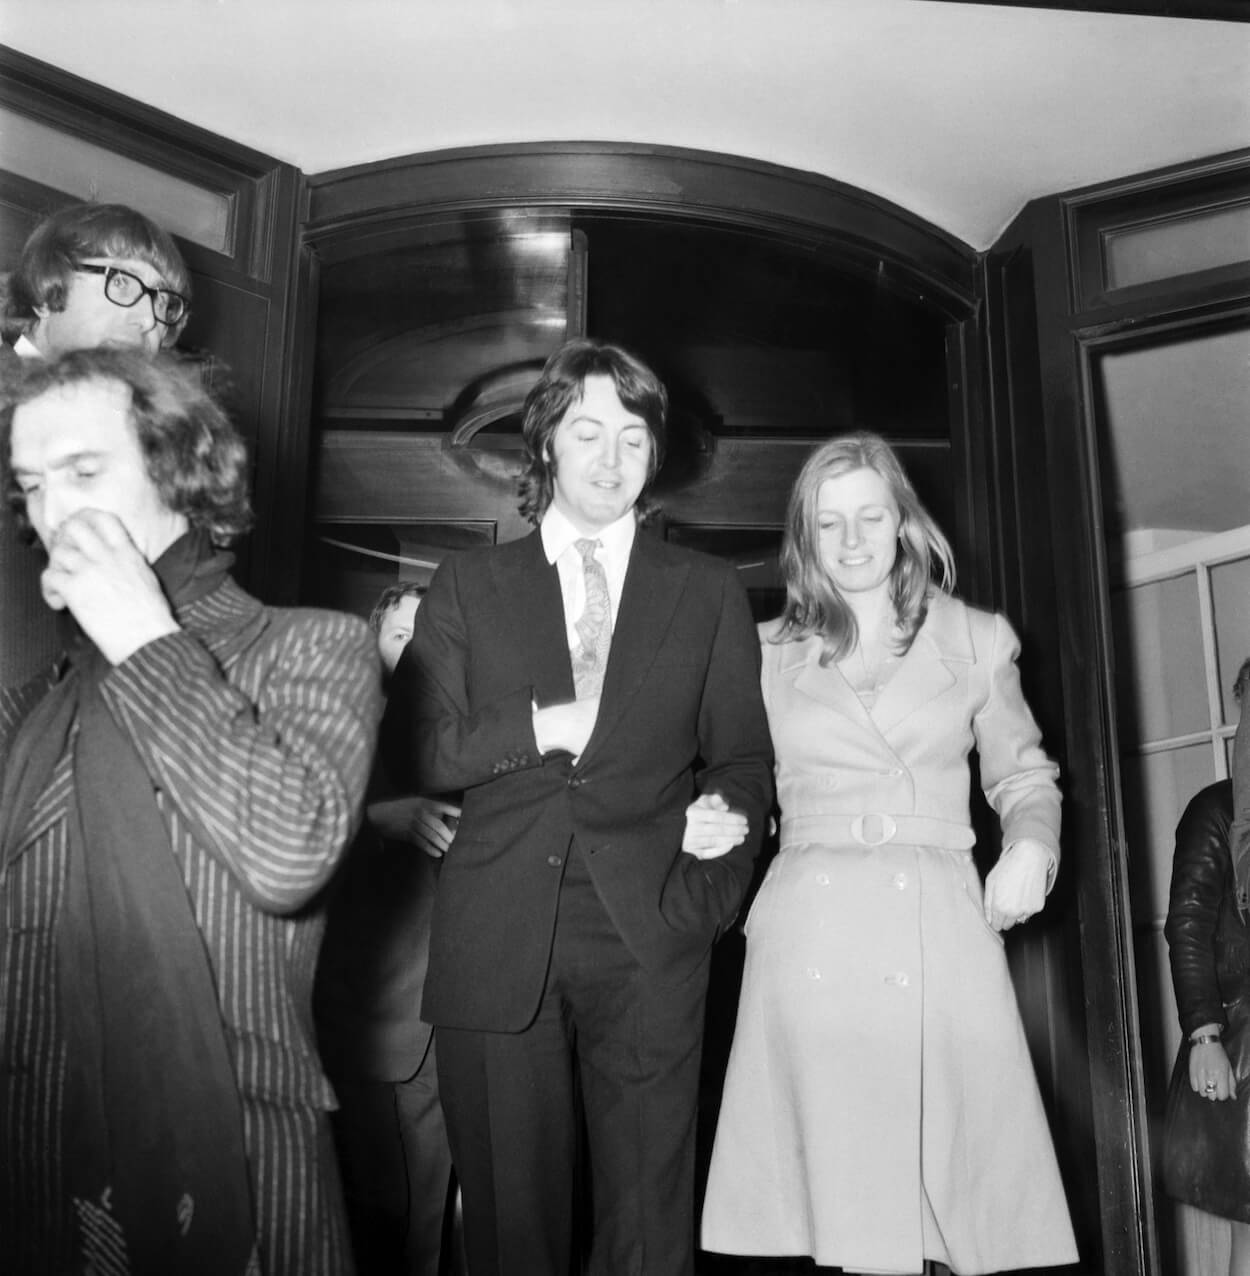 Paul McCartney (center left) and Linda Eastman leave the Ritz Hotel after celebrating their wedding on March 12, 1969.